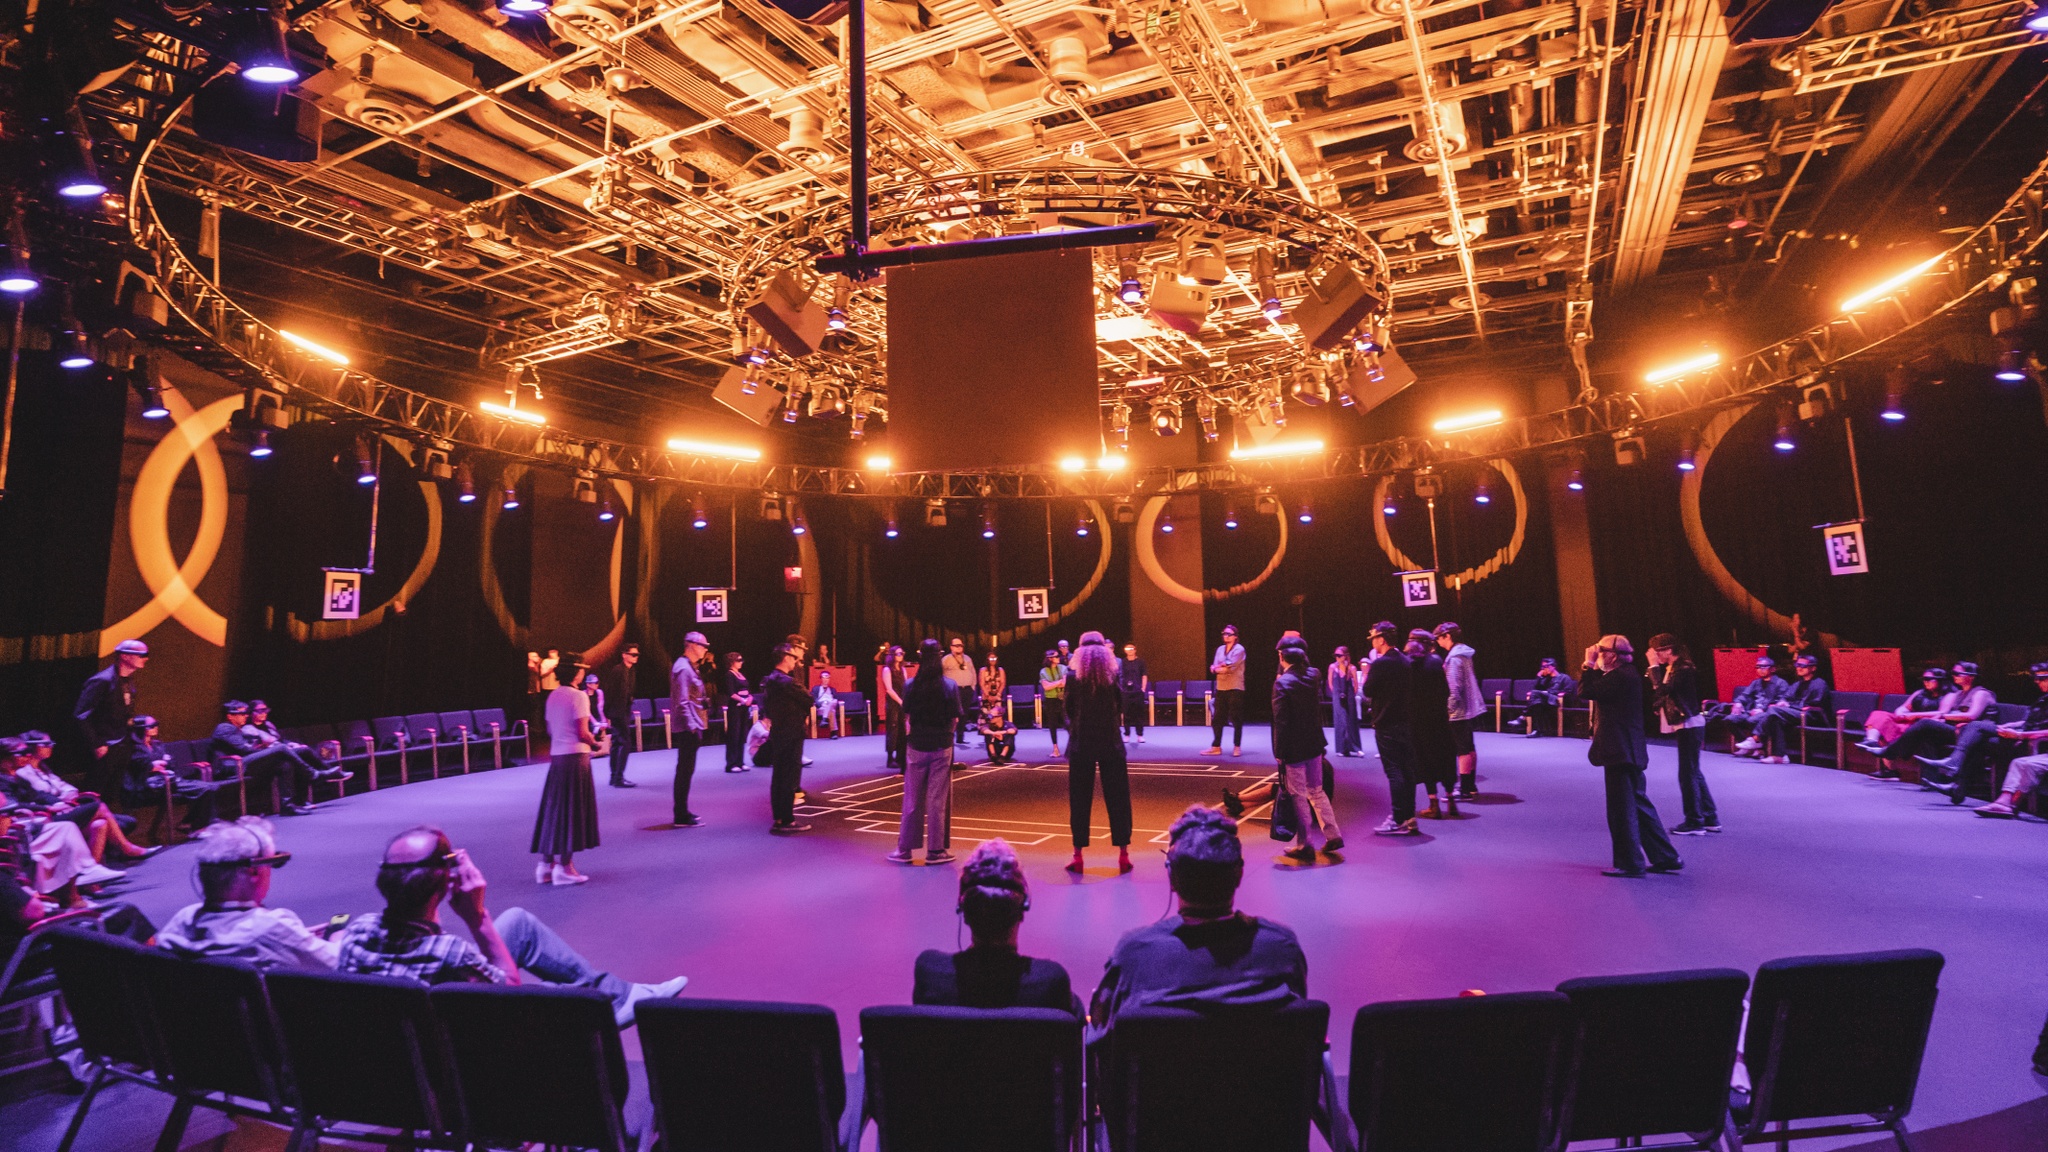 In a theater space arranged with a wide circle of chairs facing inside the circles, audiences gather in the center of the space, standing and crouching. They were headsets that look like googles over their eyes. The space is lit in purple light that illuminates the floor and a bright golden light that reveals the infrastructure of pipes and ducts in the ceiling.